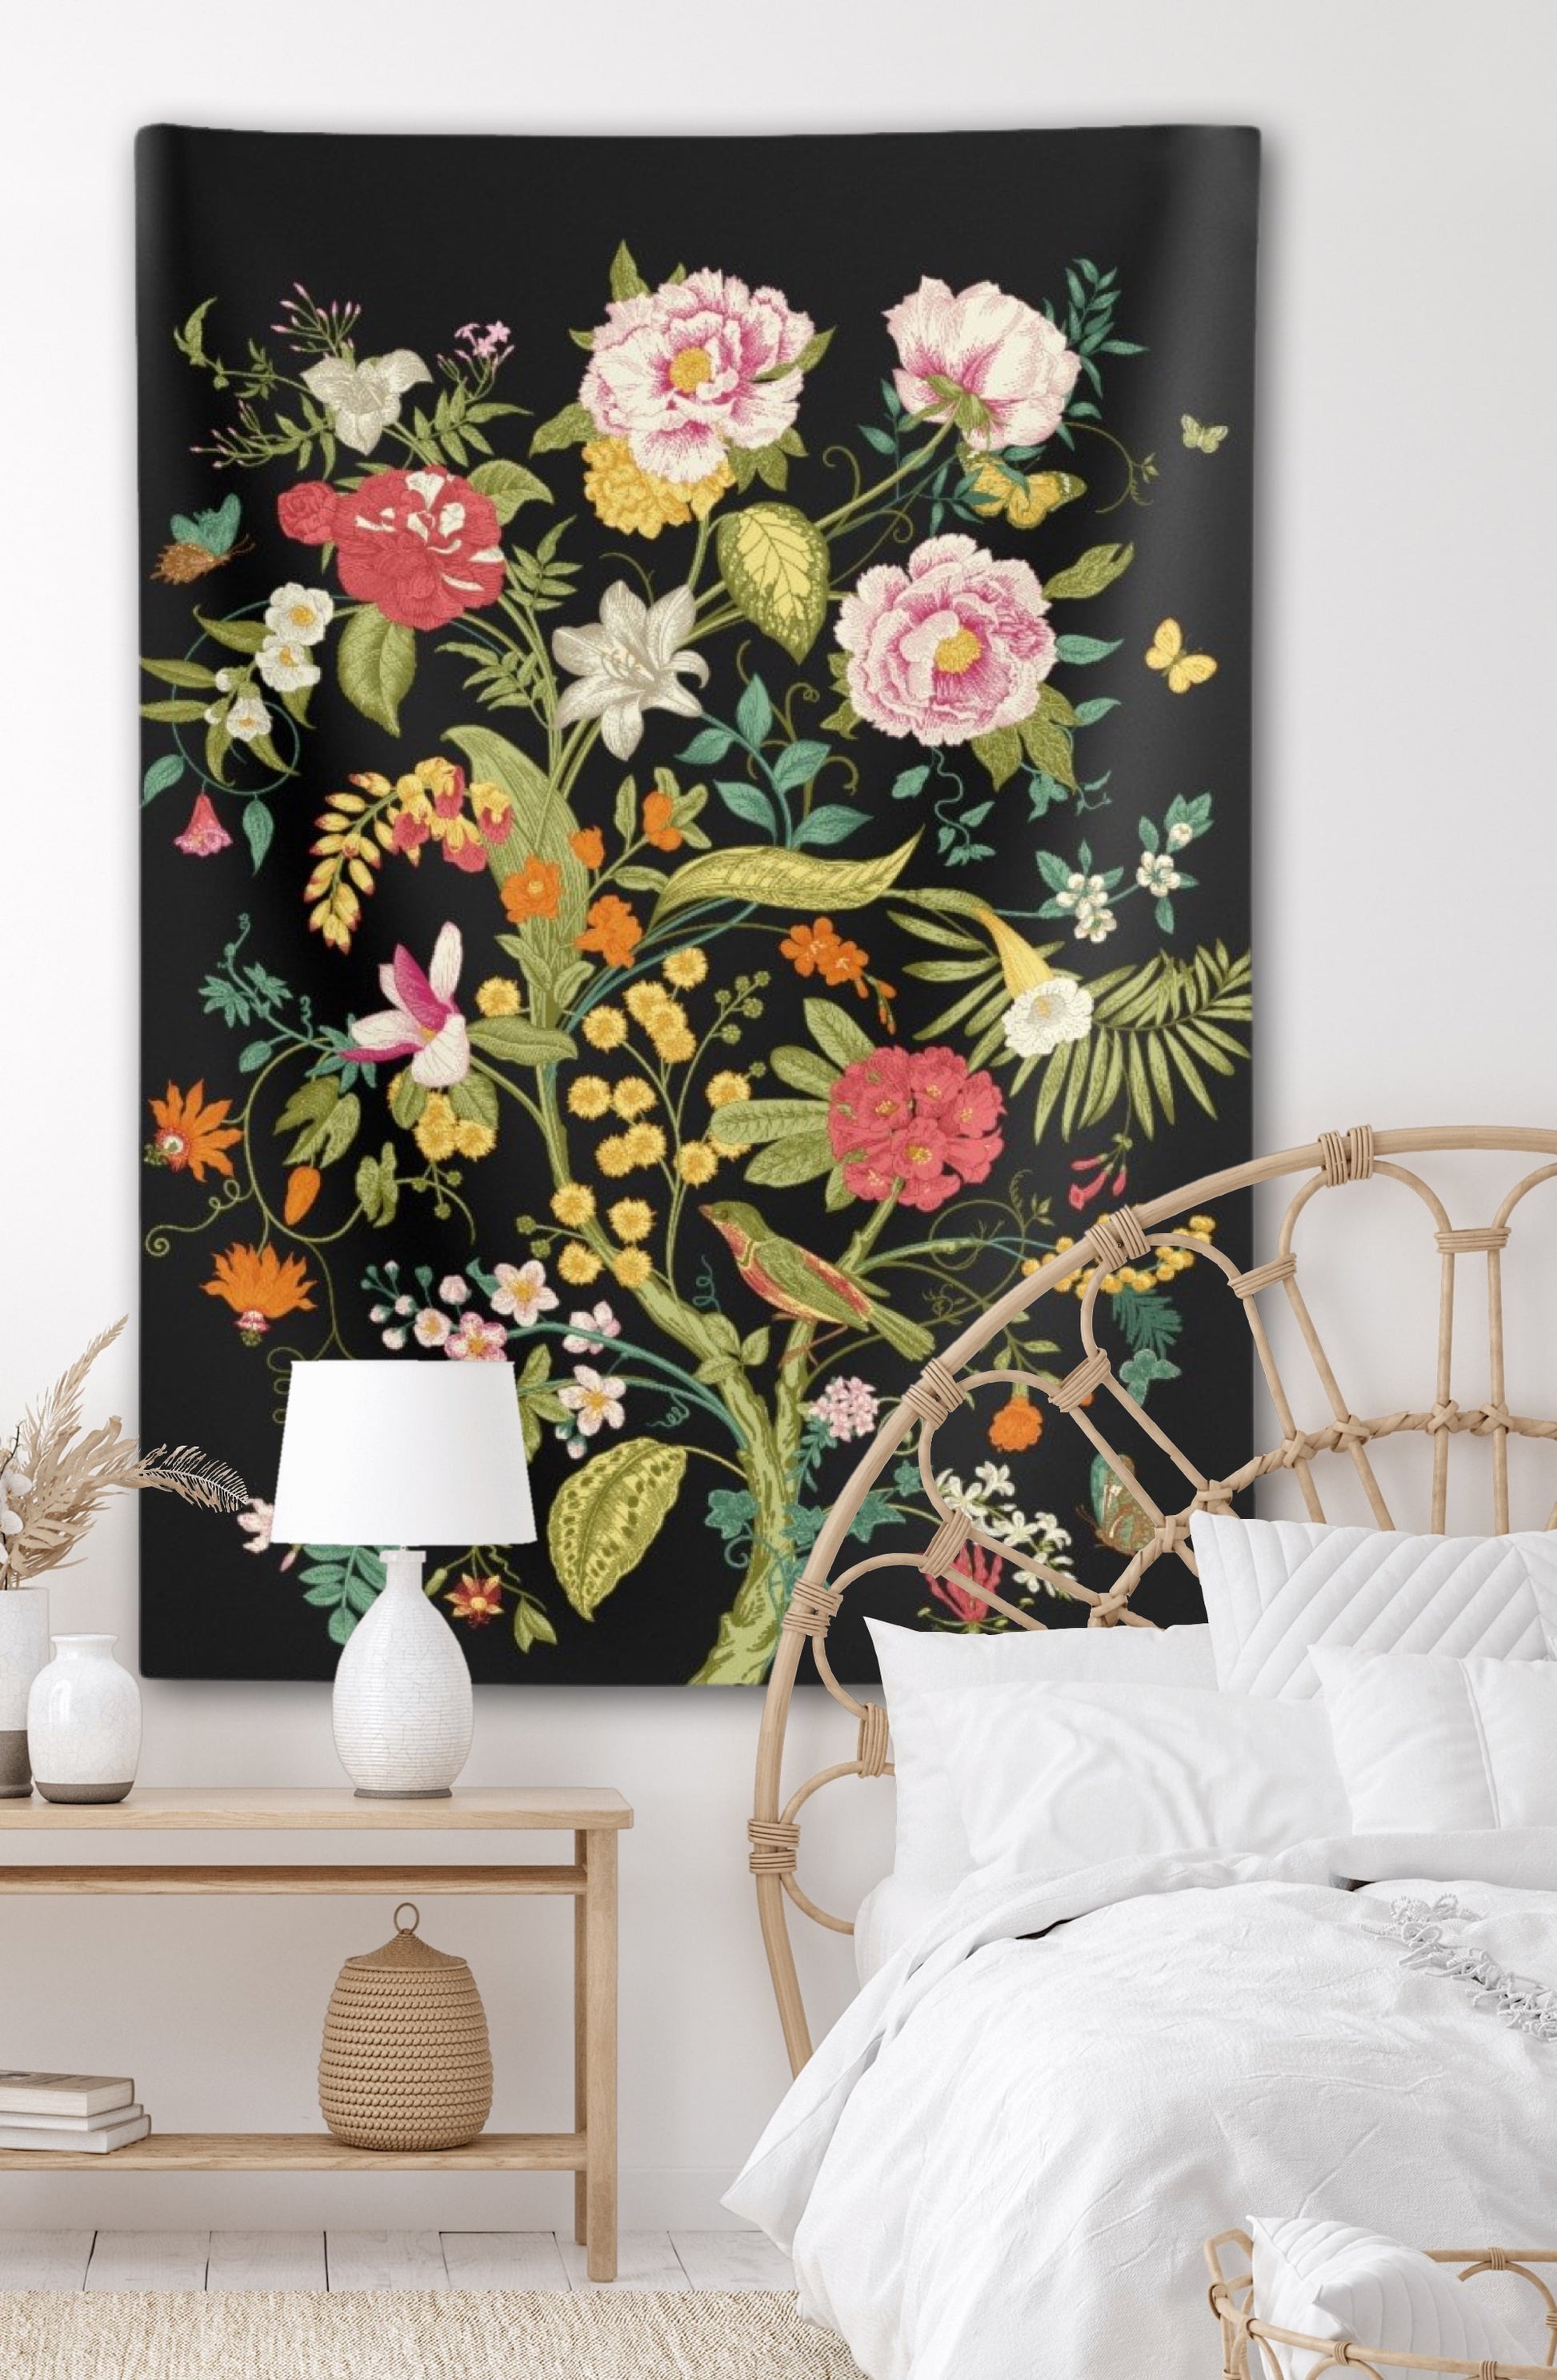 Black Floral Tree Wall Tapestry